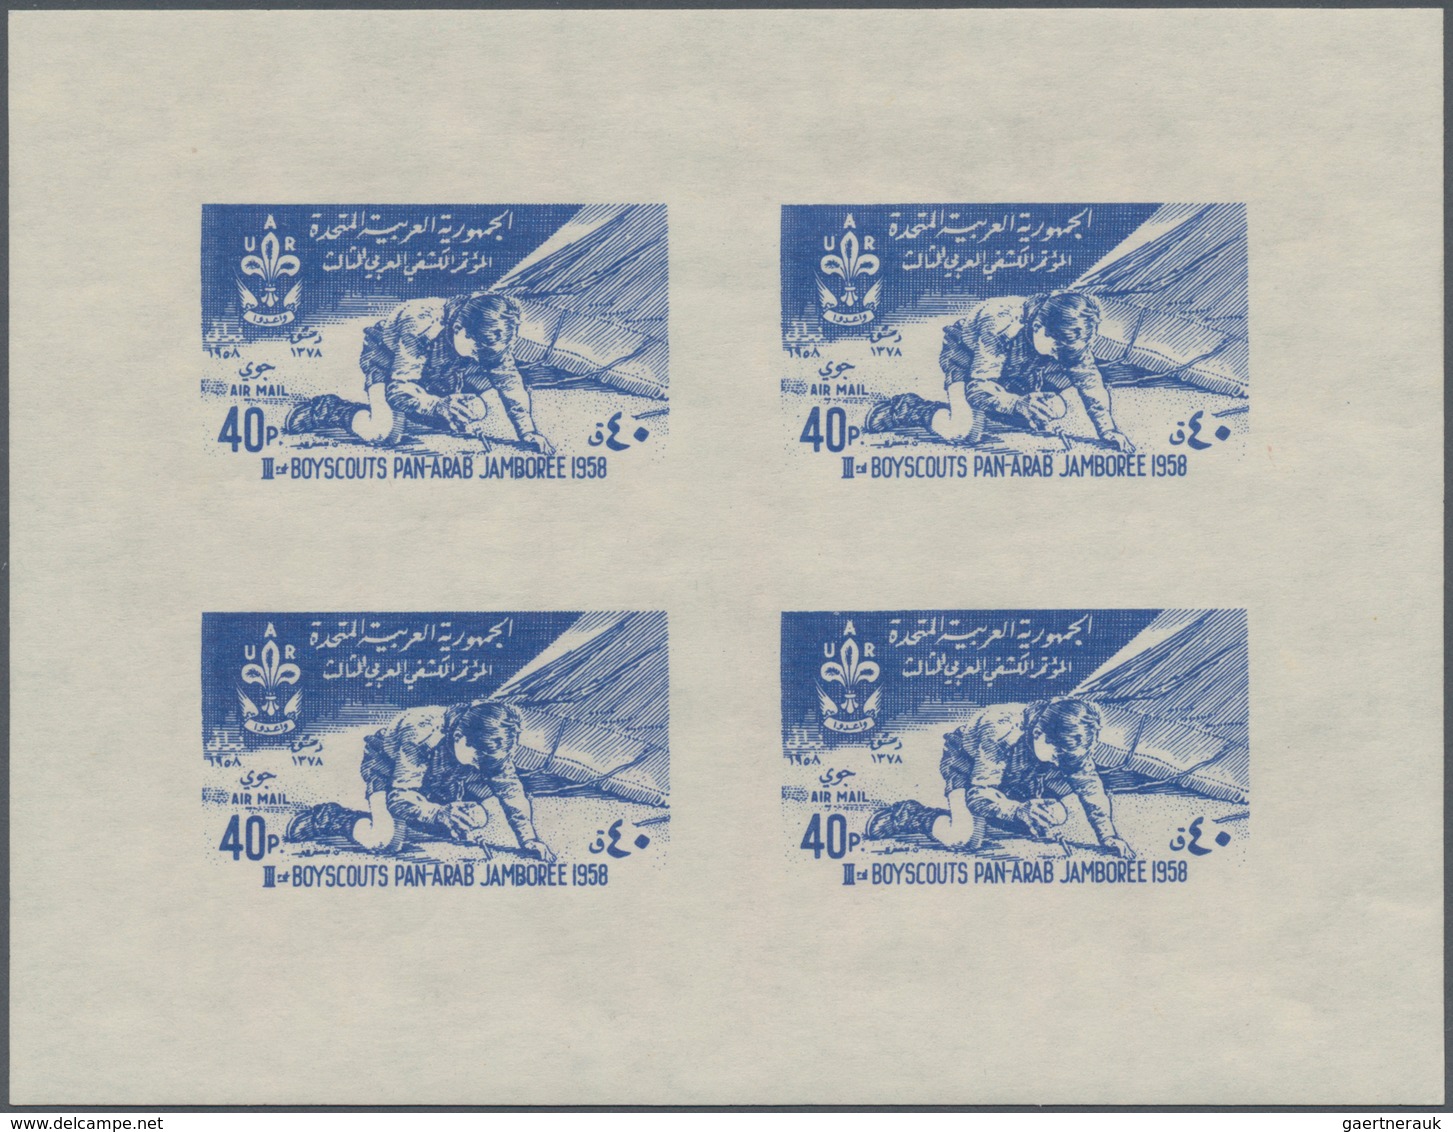 Syrien: 1958, UAR Issues, MNH Holding Of 146 Imperforate De Luxe Sheets: Foundation Of UAR (Michel N - Syrien